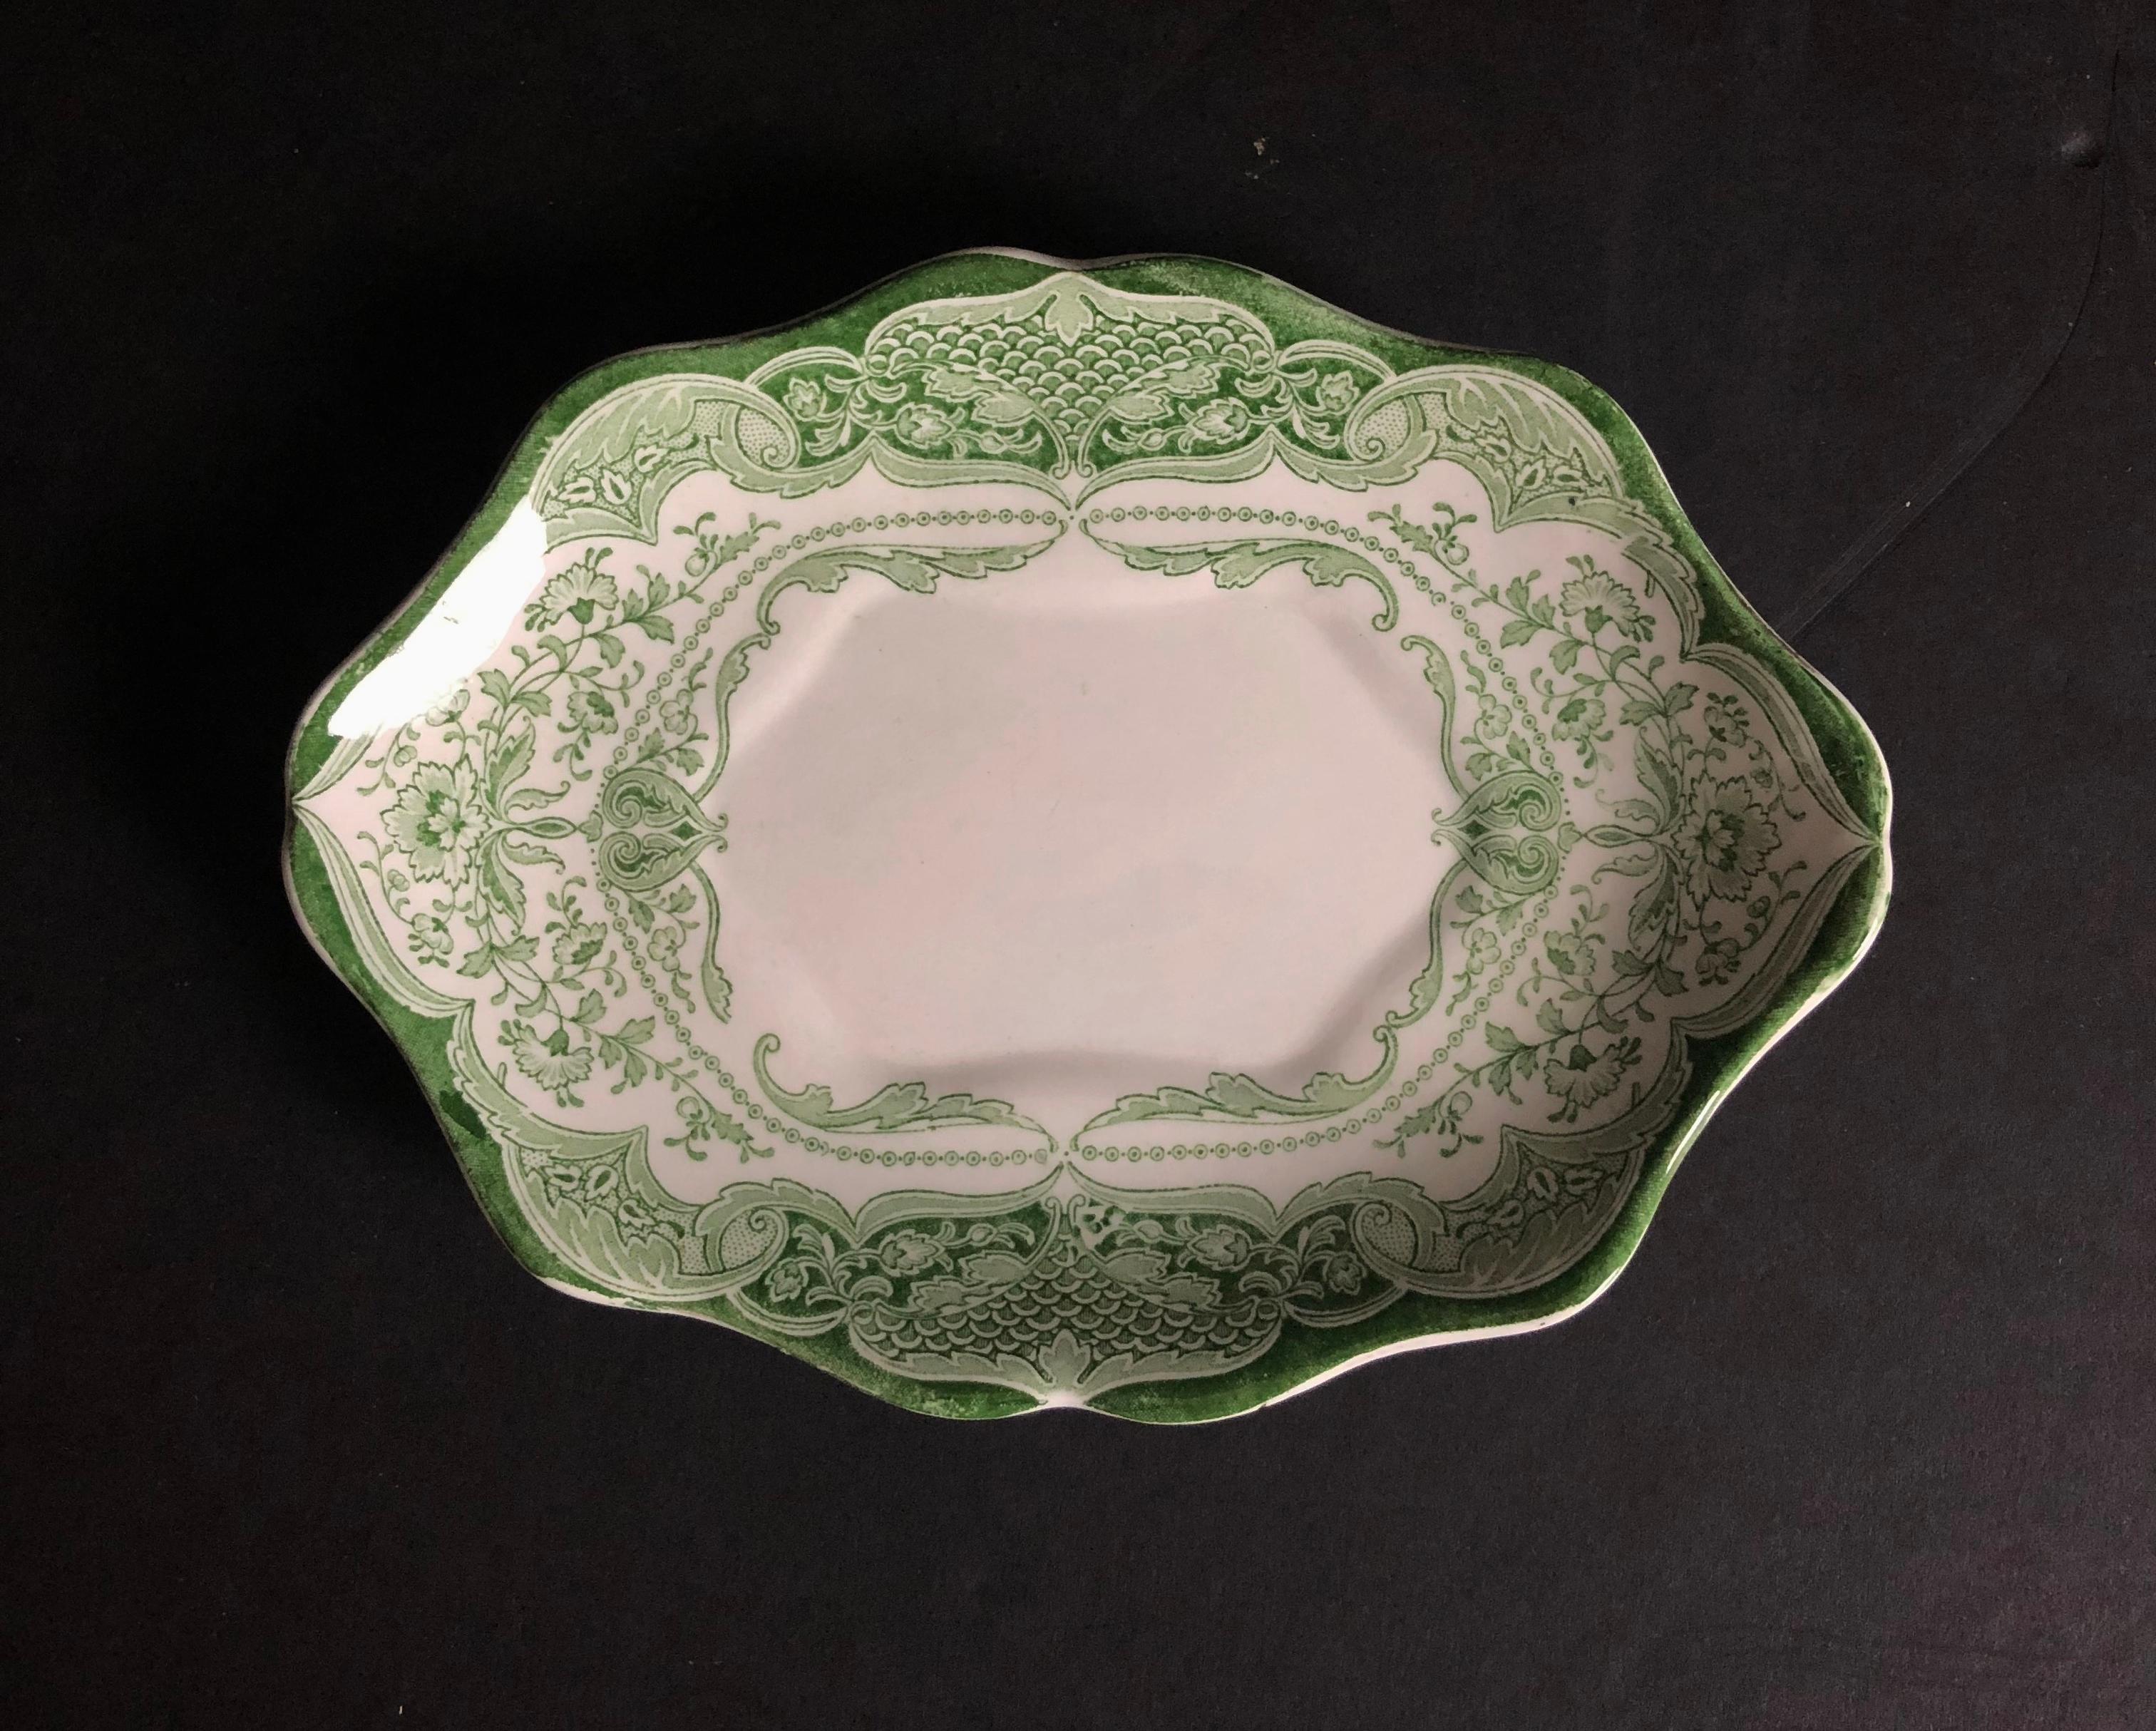 Glazed Antique Continental Green and White 4-Piece Gravy Boat